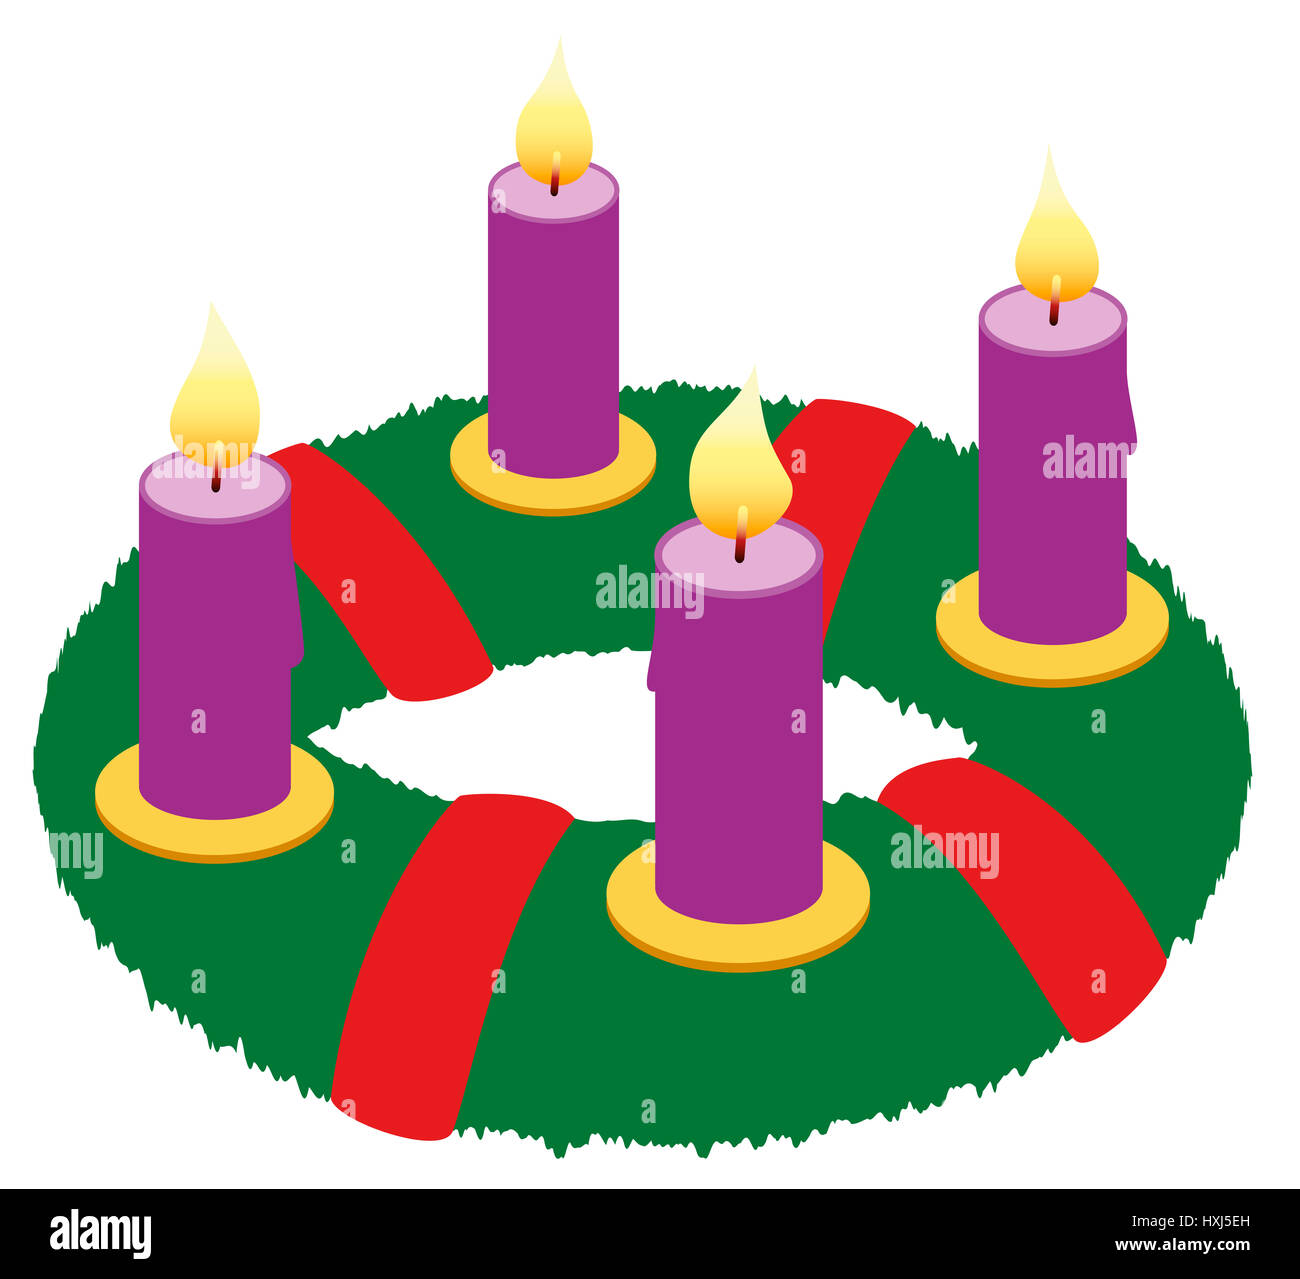 Advent wreath with burning purple candles and red ribbons - isolated icon illustration on white background. Stock Photo